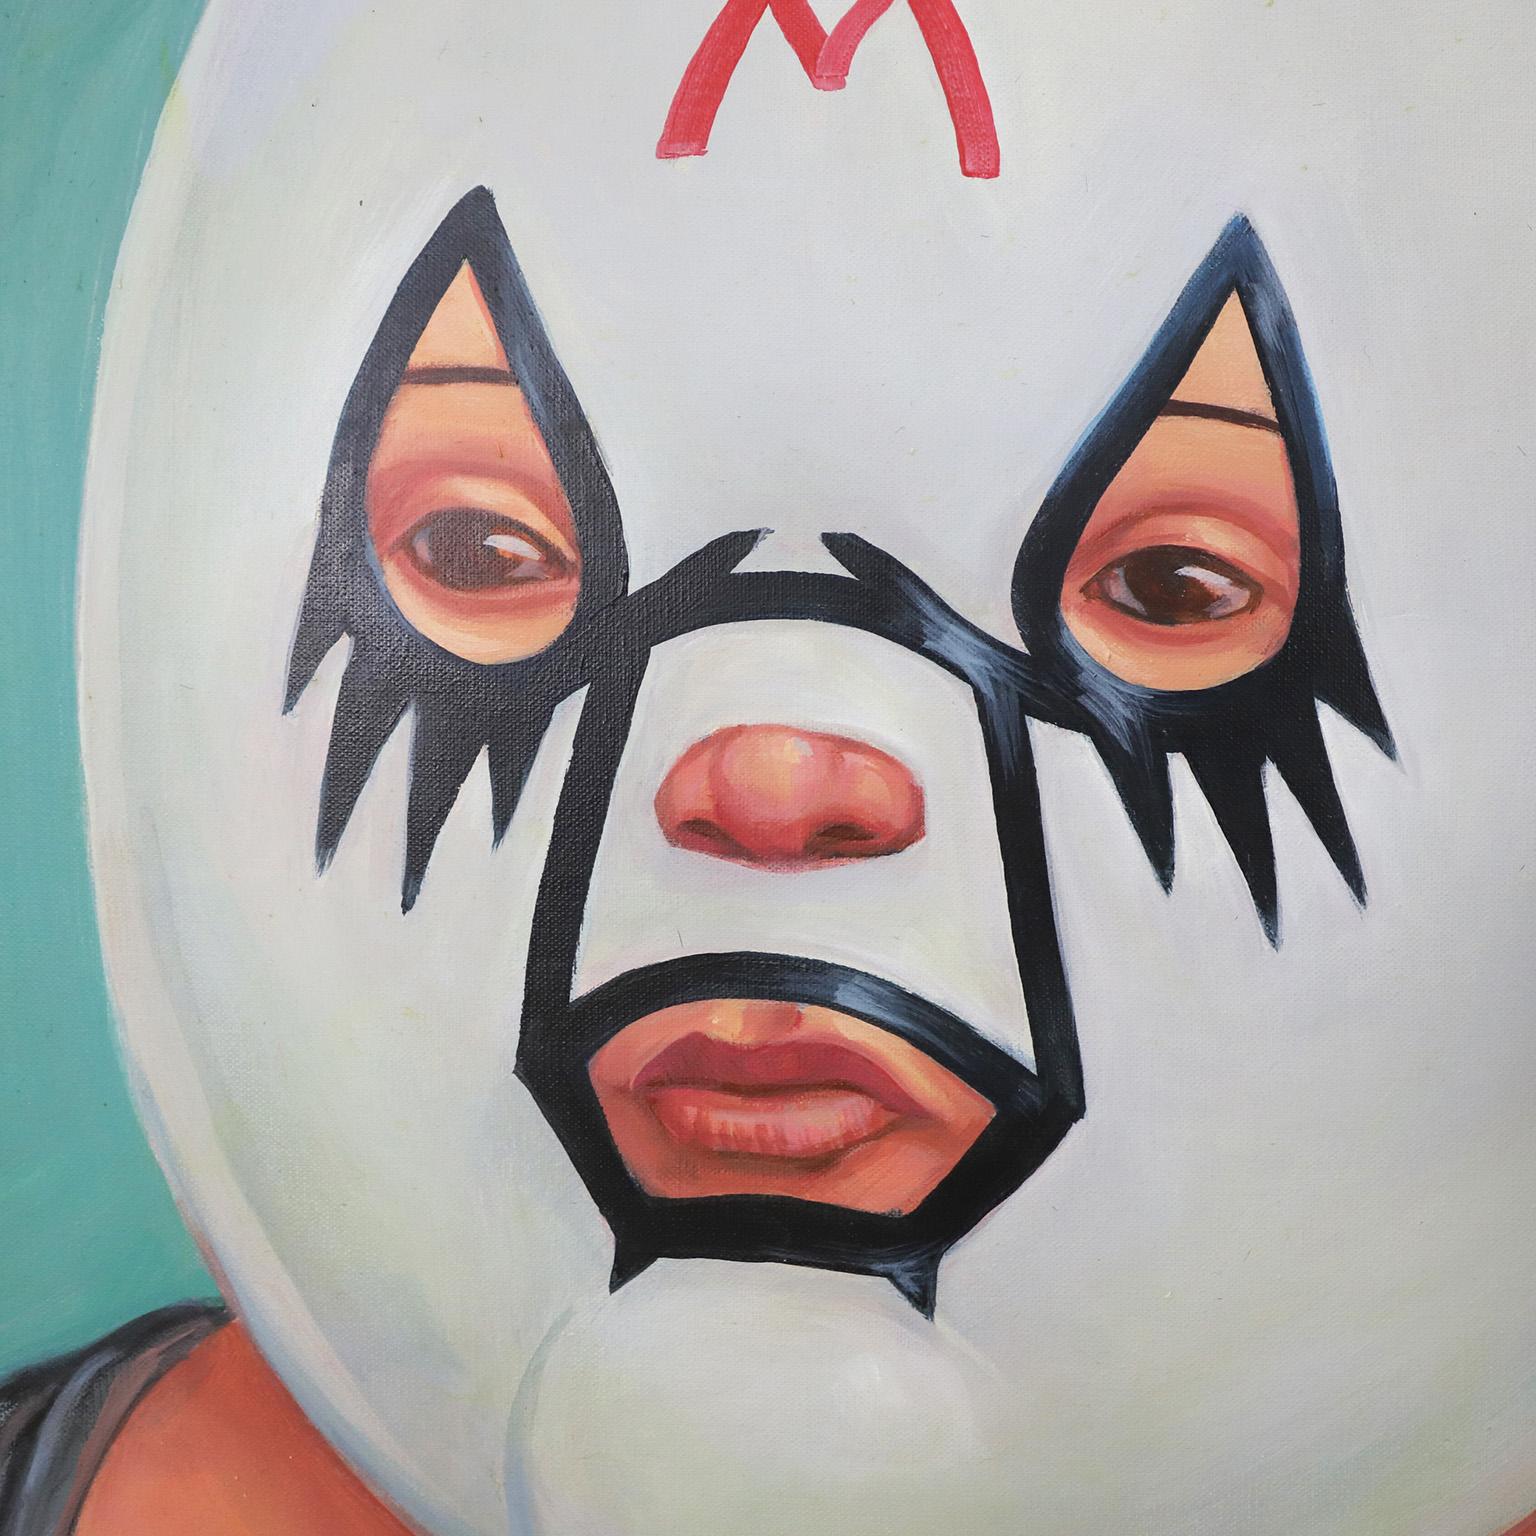 Circa 1970, we offer this rare Mexican wrestler painting.